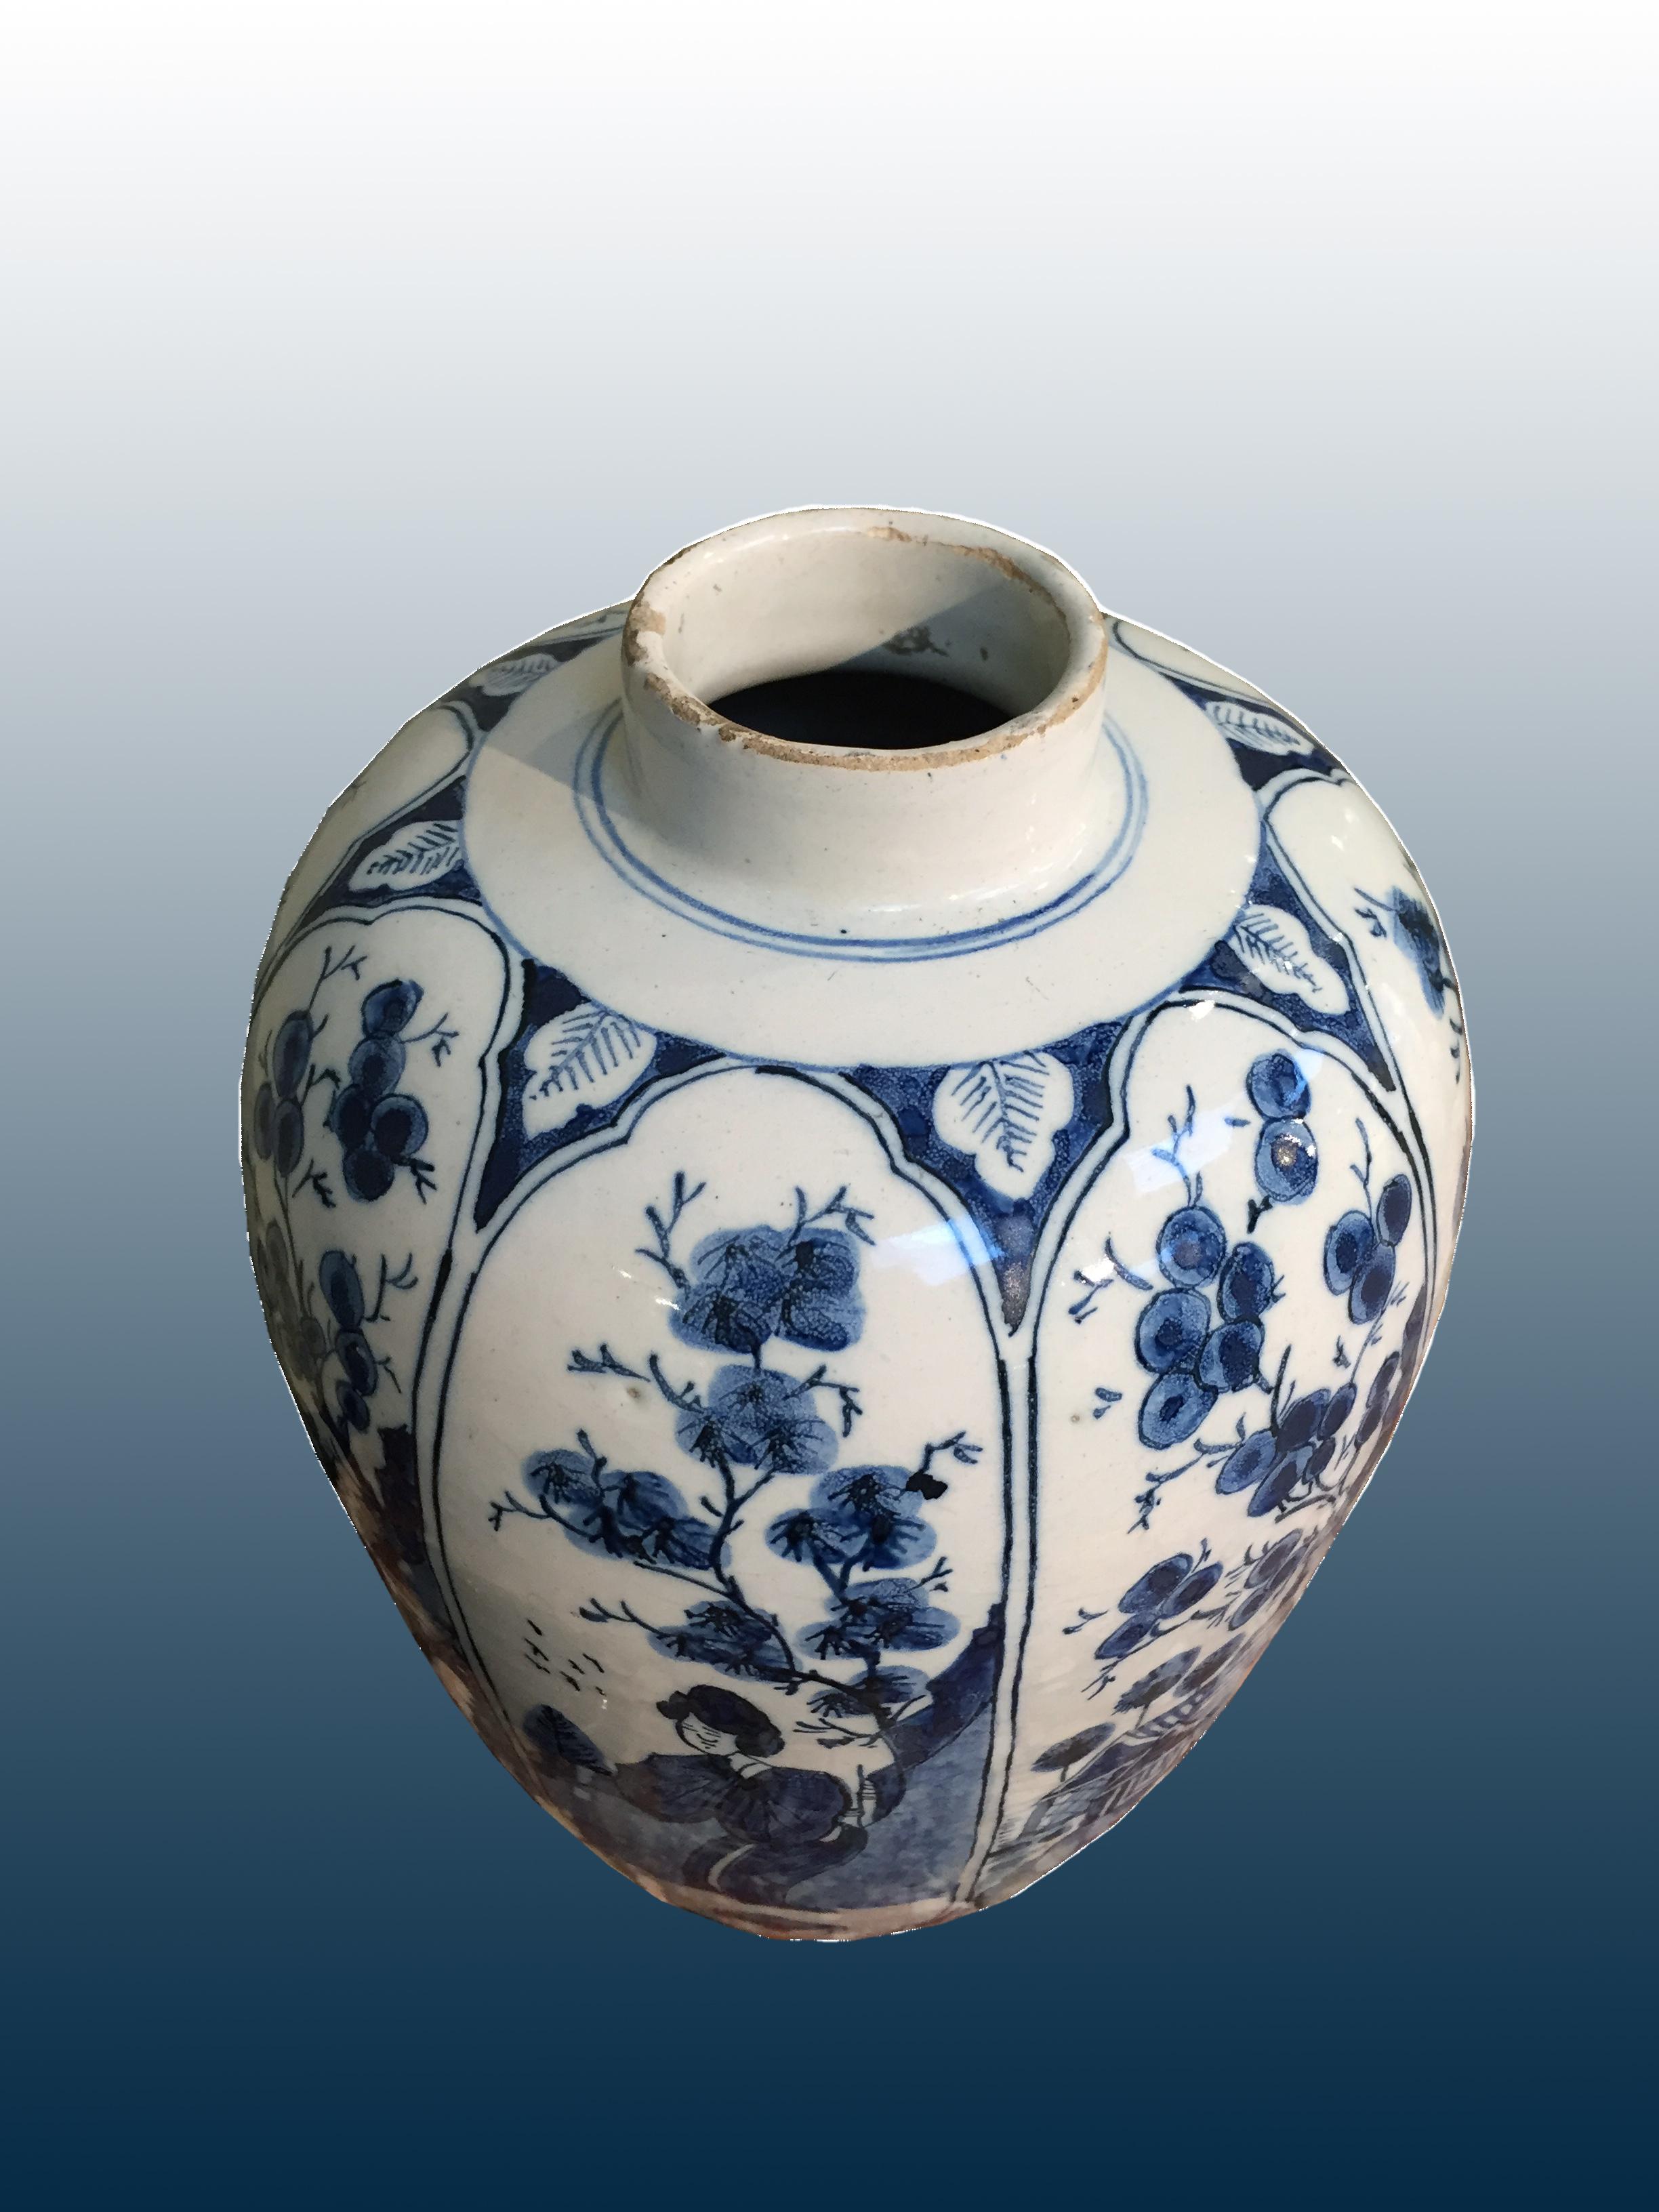 Ceramic Blue and White Dutch Delft Lidded Jar in Chinoiserie, Early 18th Century For Sale